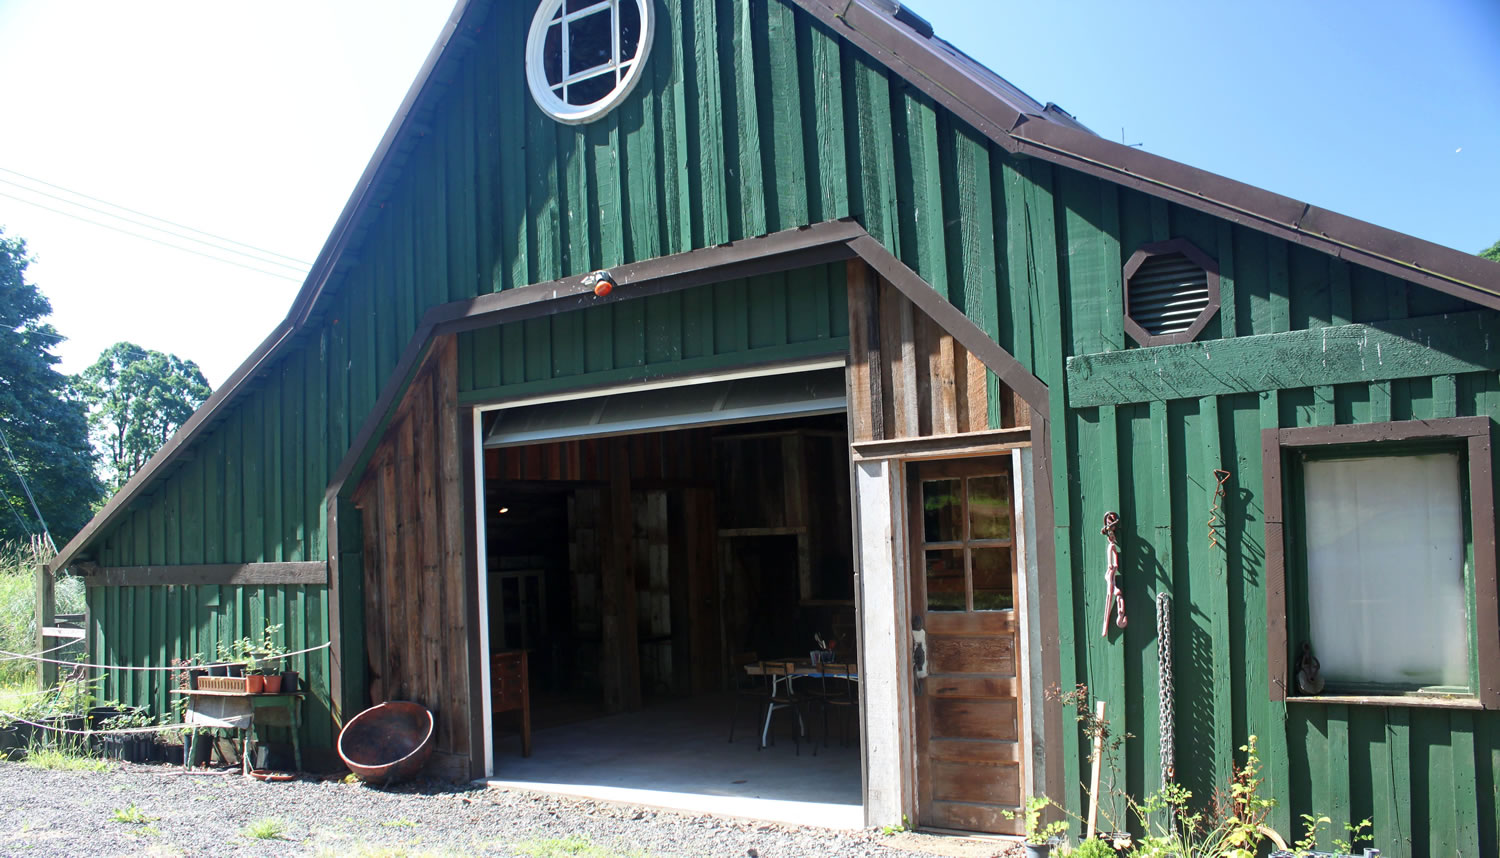 If Nell Warren and Greg Misarti have a plan amendment approved by the Columbia Gorge Commission, they would eventually like to have three artists living on their property and using this refurbished 1895 barn for studio space.